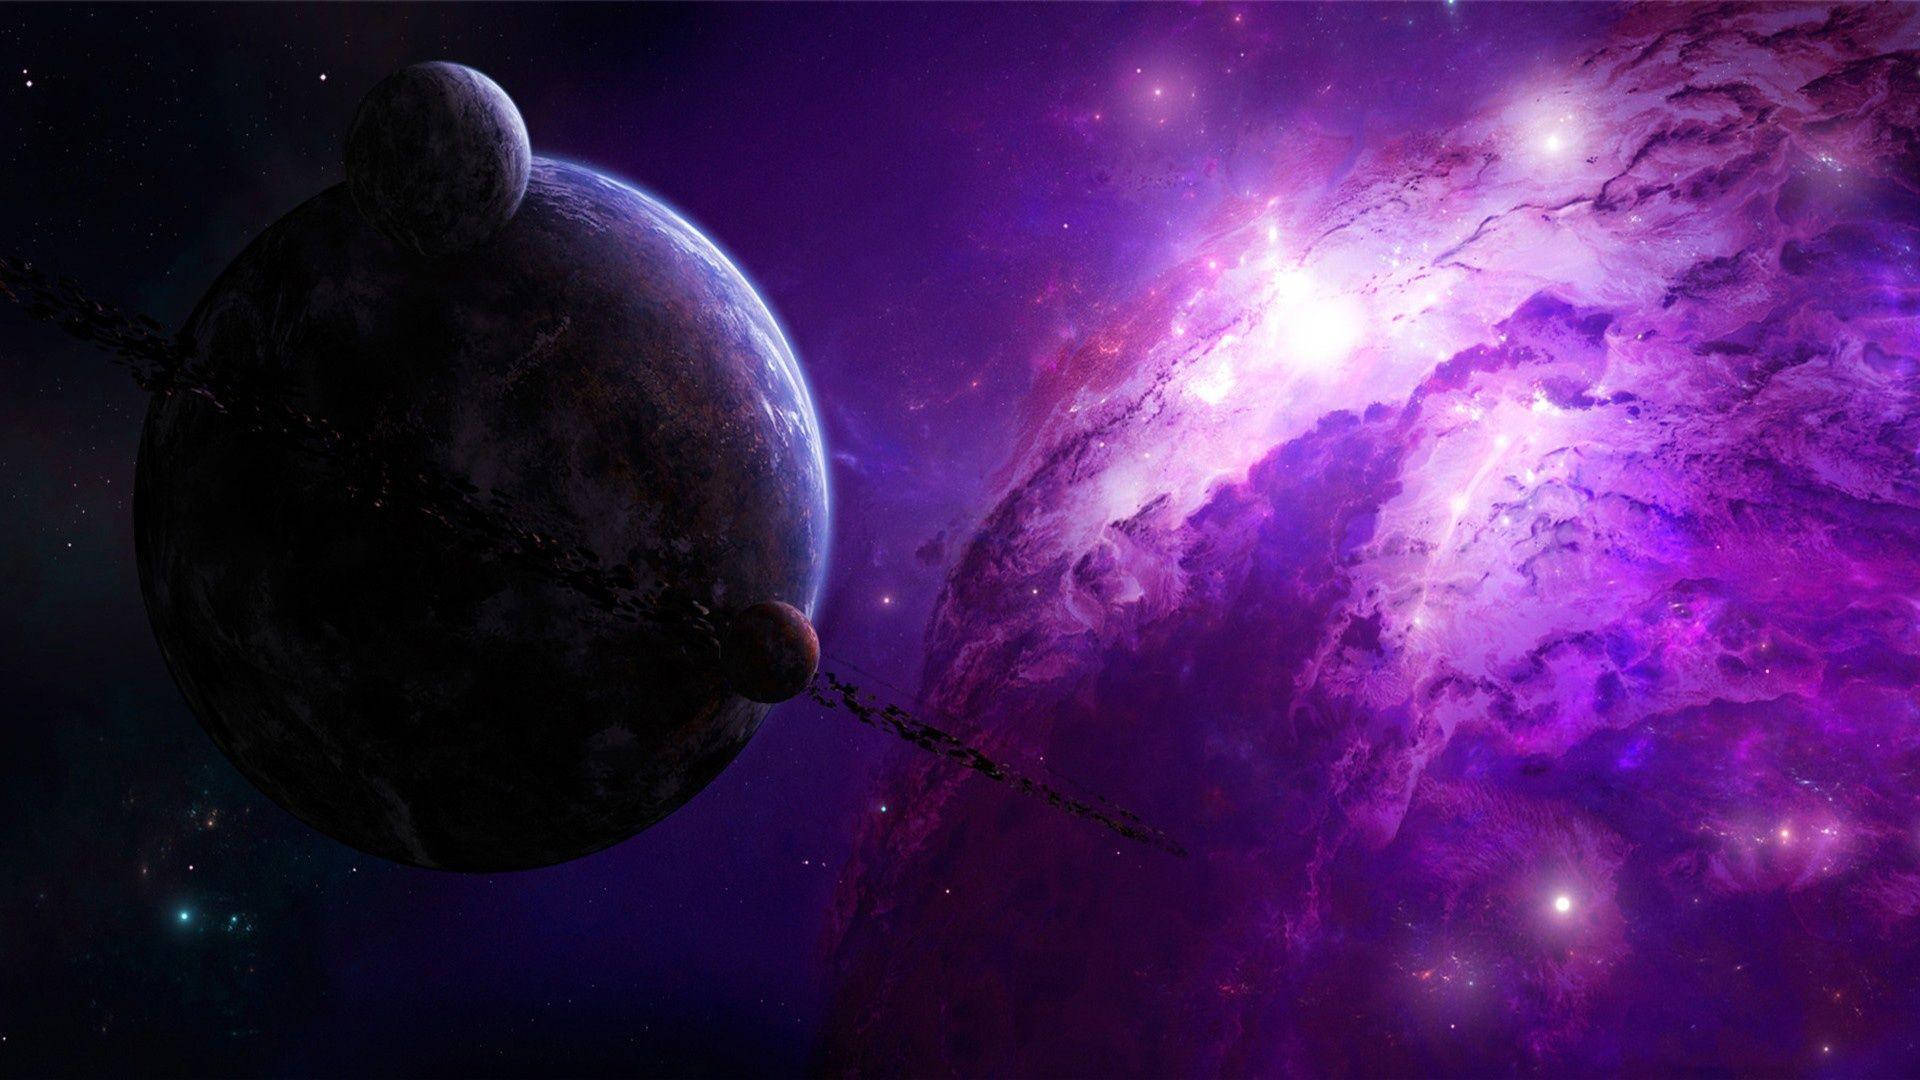 Discover Heavenly Bodies in a Stunning Purple Galaxy Wallpaper